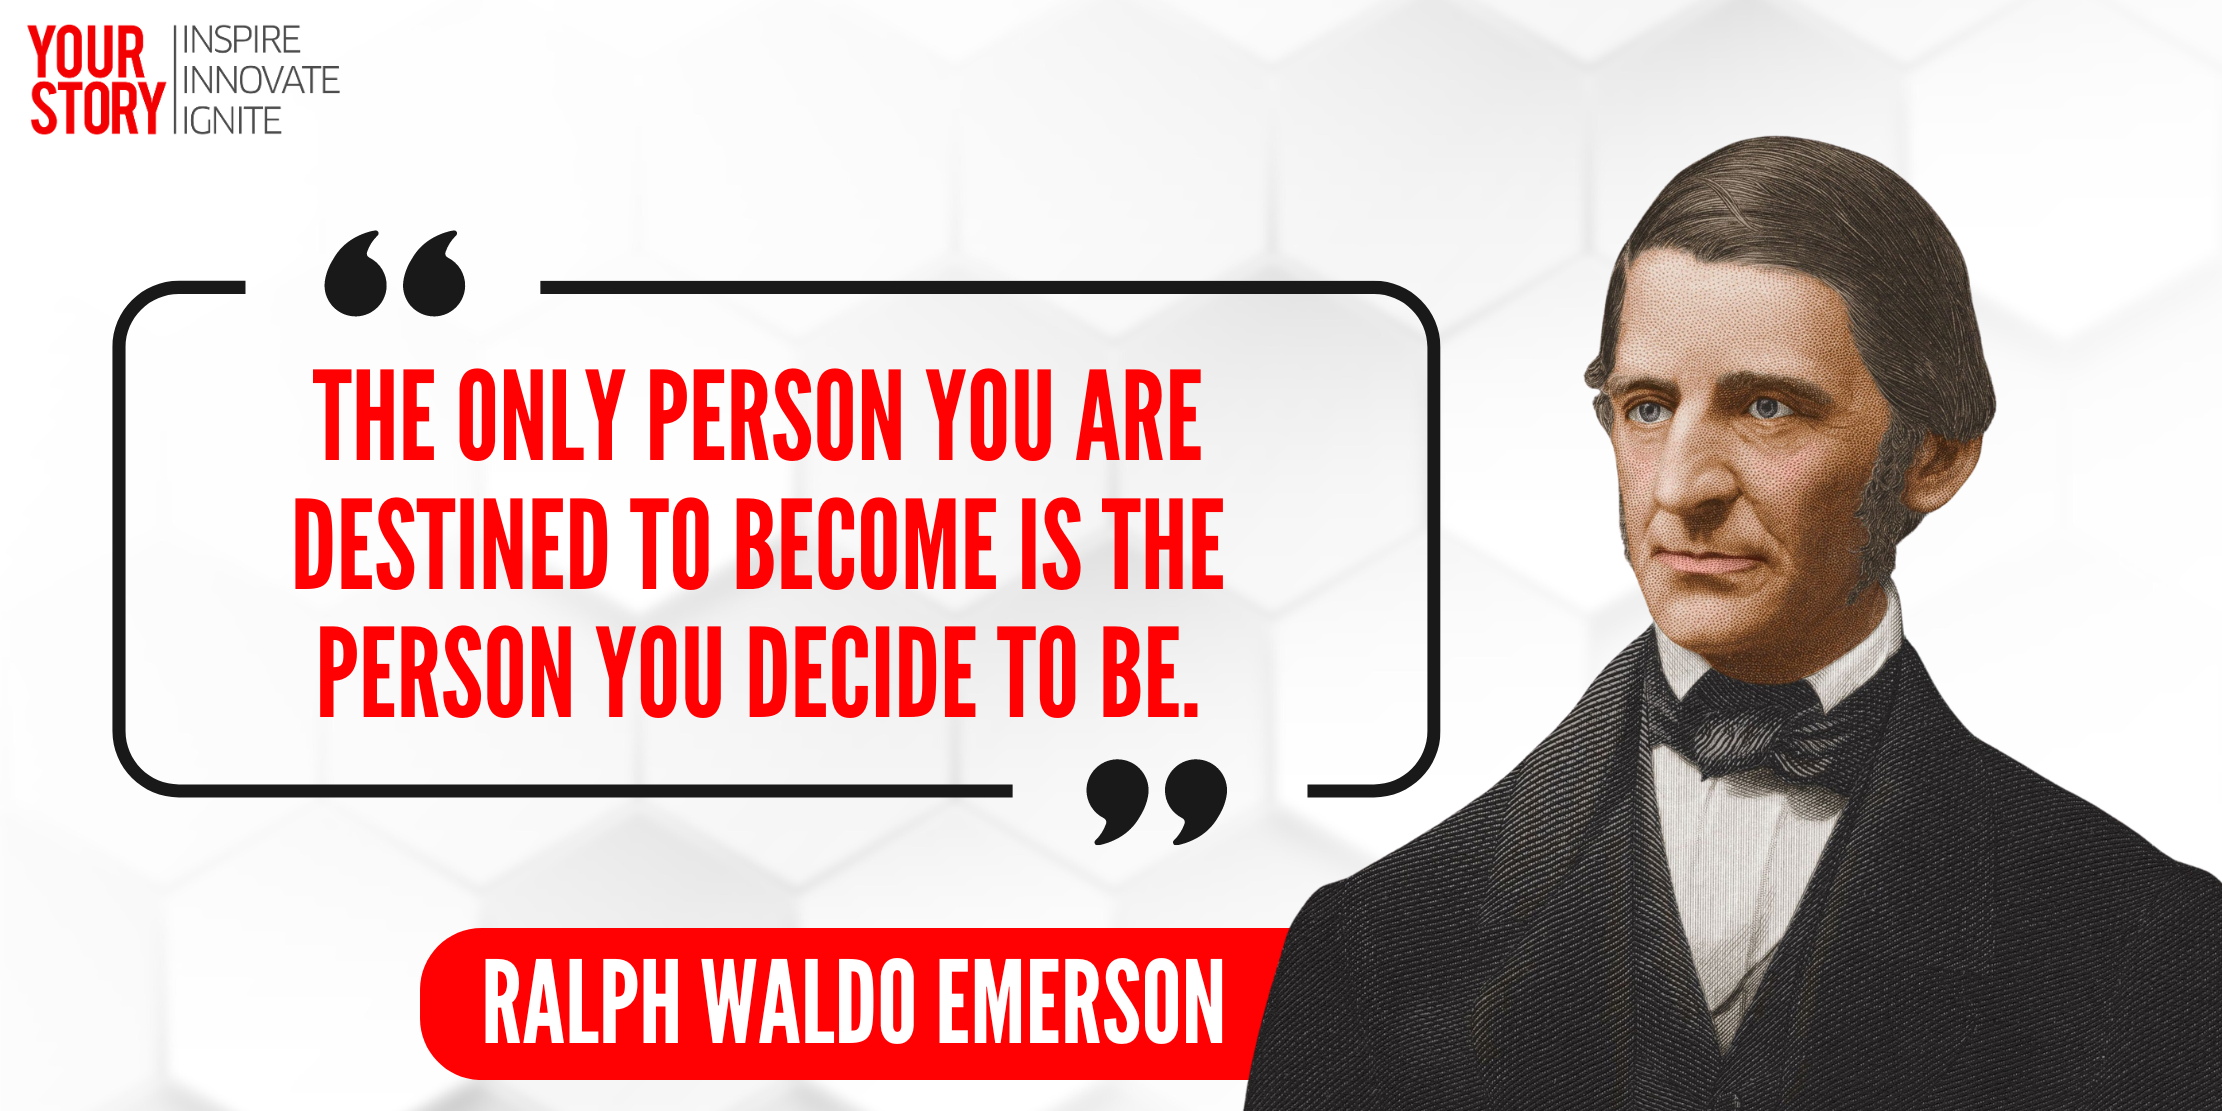 The Only Person You Are Destined To Become Is The Person You Decide To Be